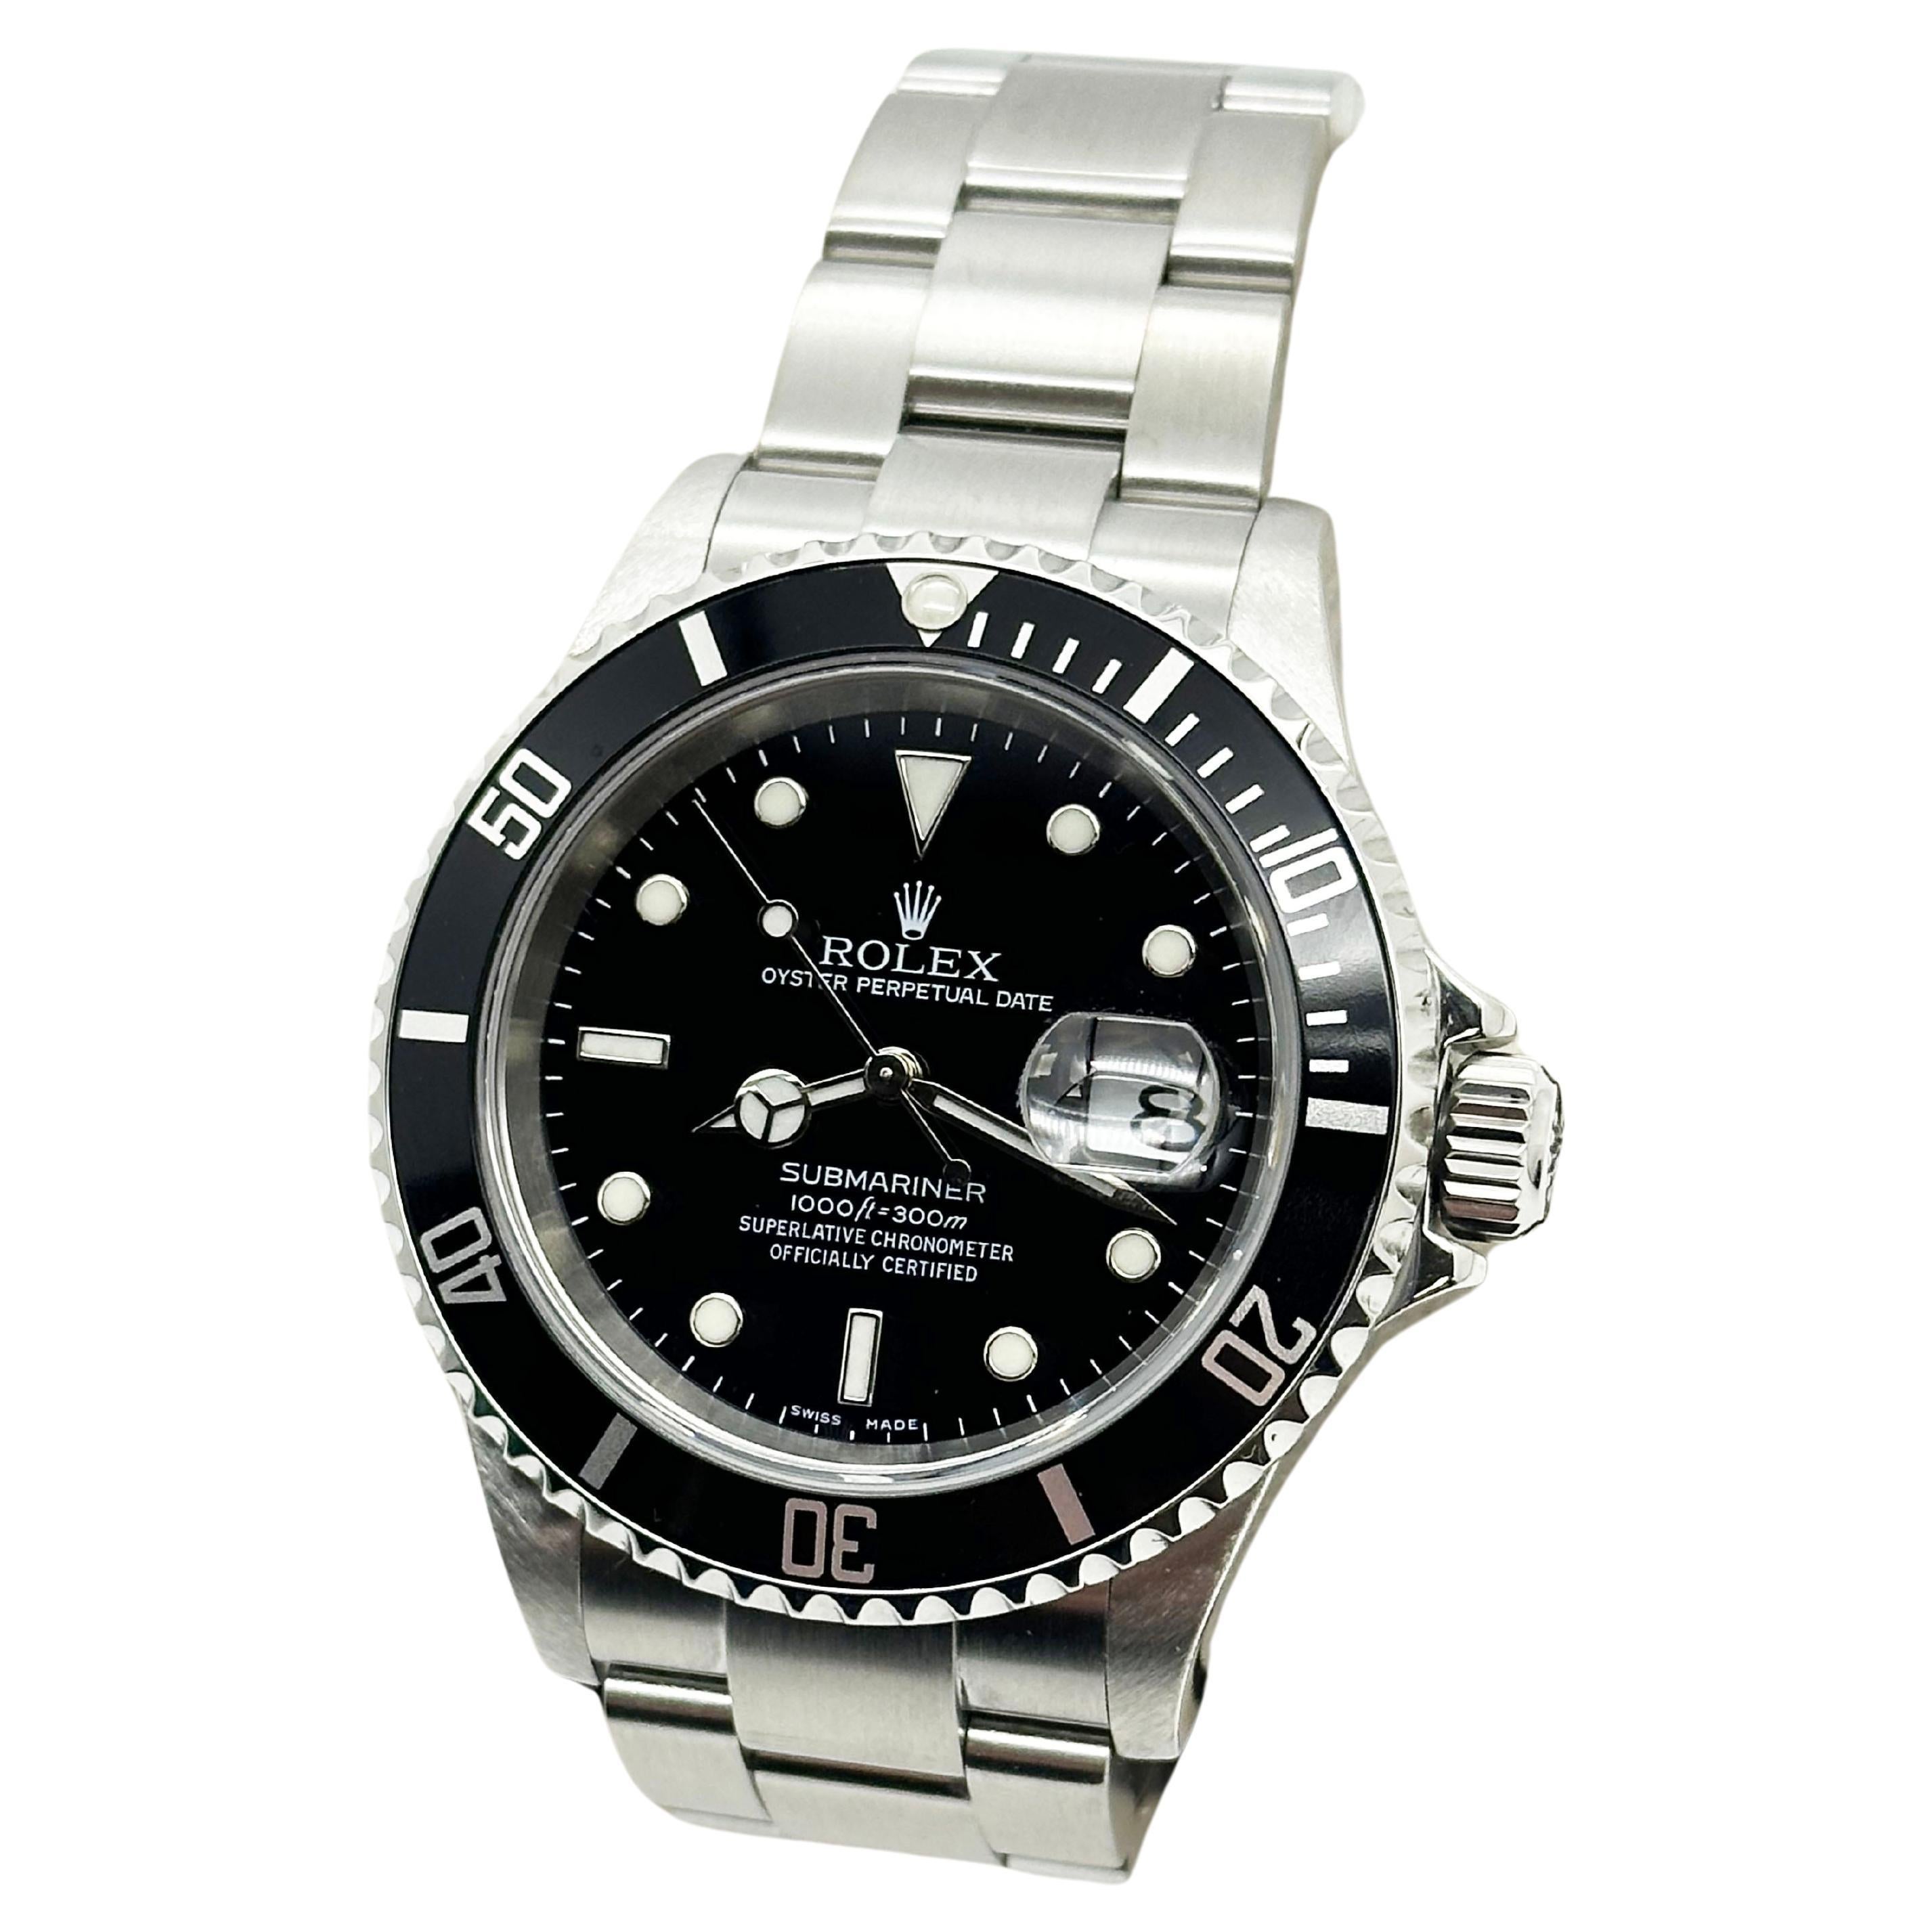 Rolex 16610 Submariner Date Black Dial Stainless Steel 2005 Box Paper